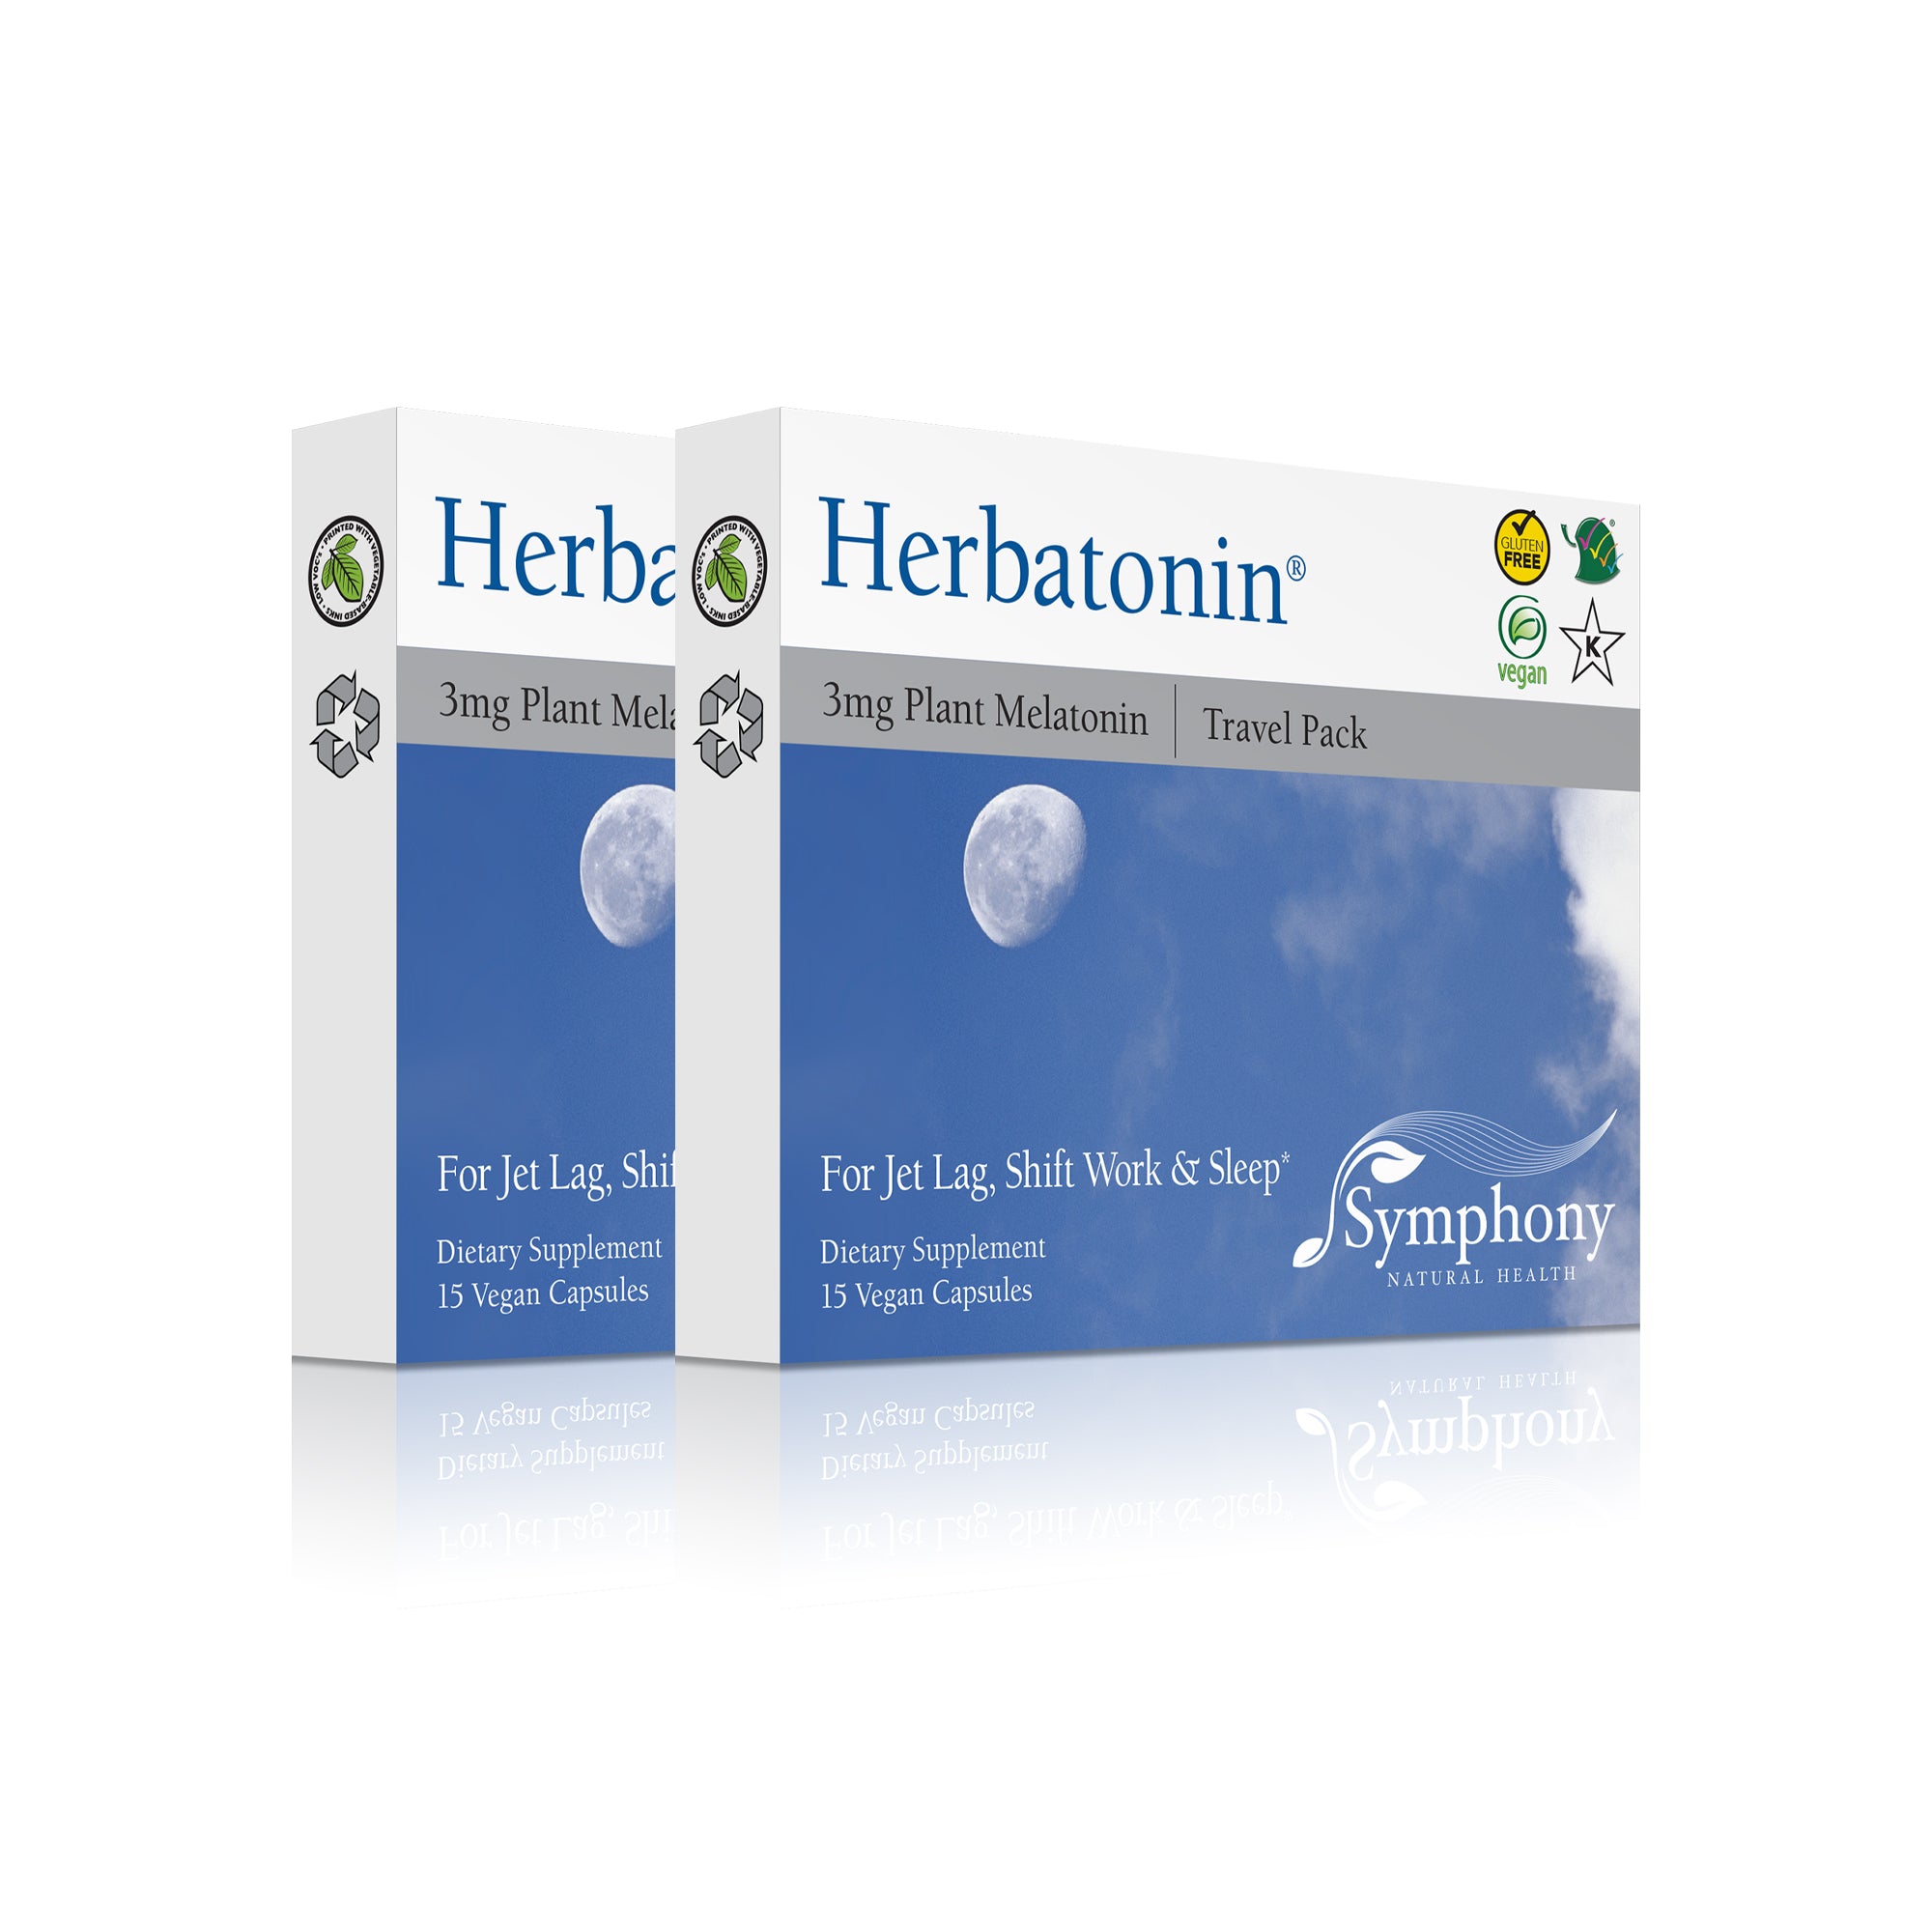 Herbatonin 3mg Travel 2-Pack right-facing front and side of two product boxes Herbatonin blue logo on white background, moon in daylight blue sky and clouds, gluten free, vegan and Kosher logos, symphony logo